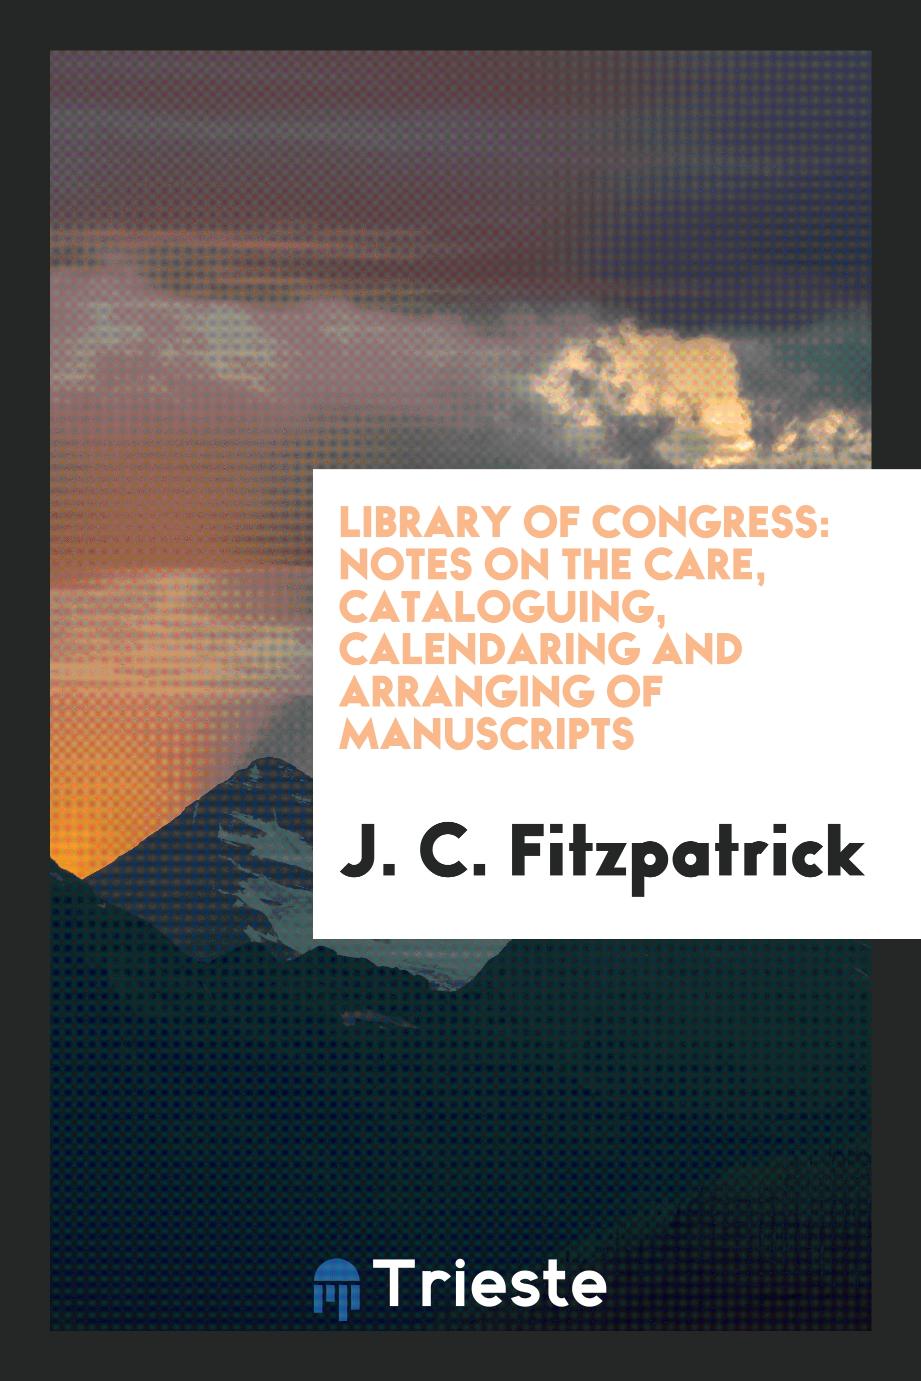 Library of Congress: Notes on the care, cataloguing, calendaring and arranging of manuscripts